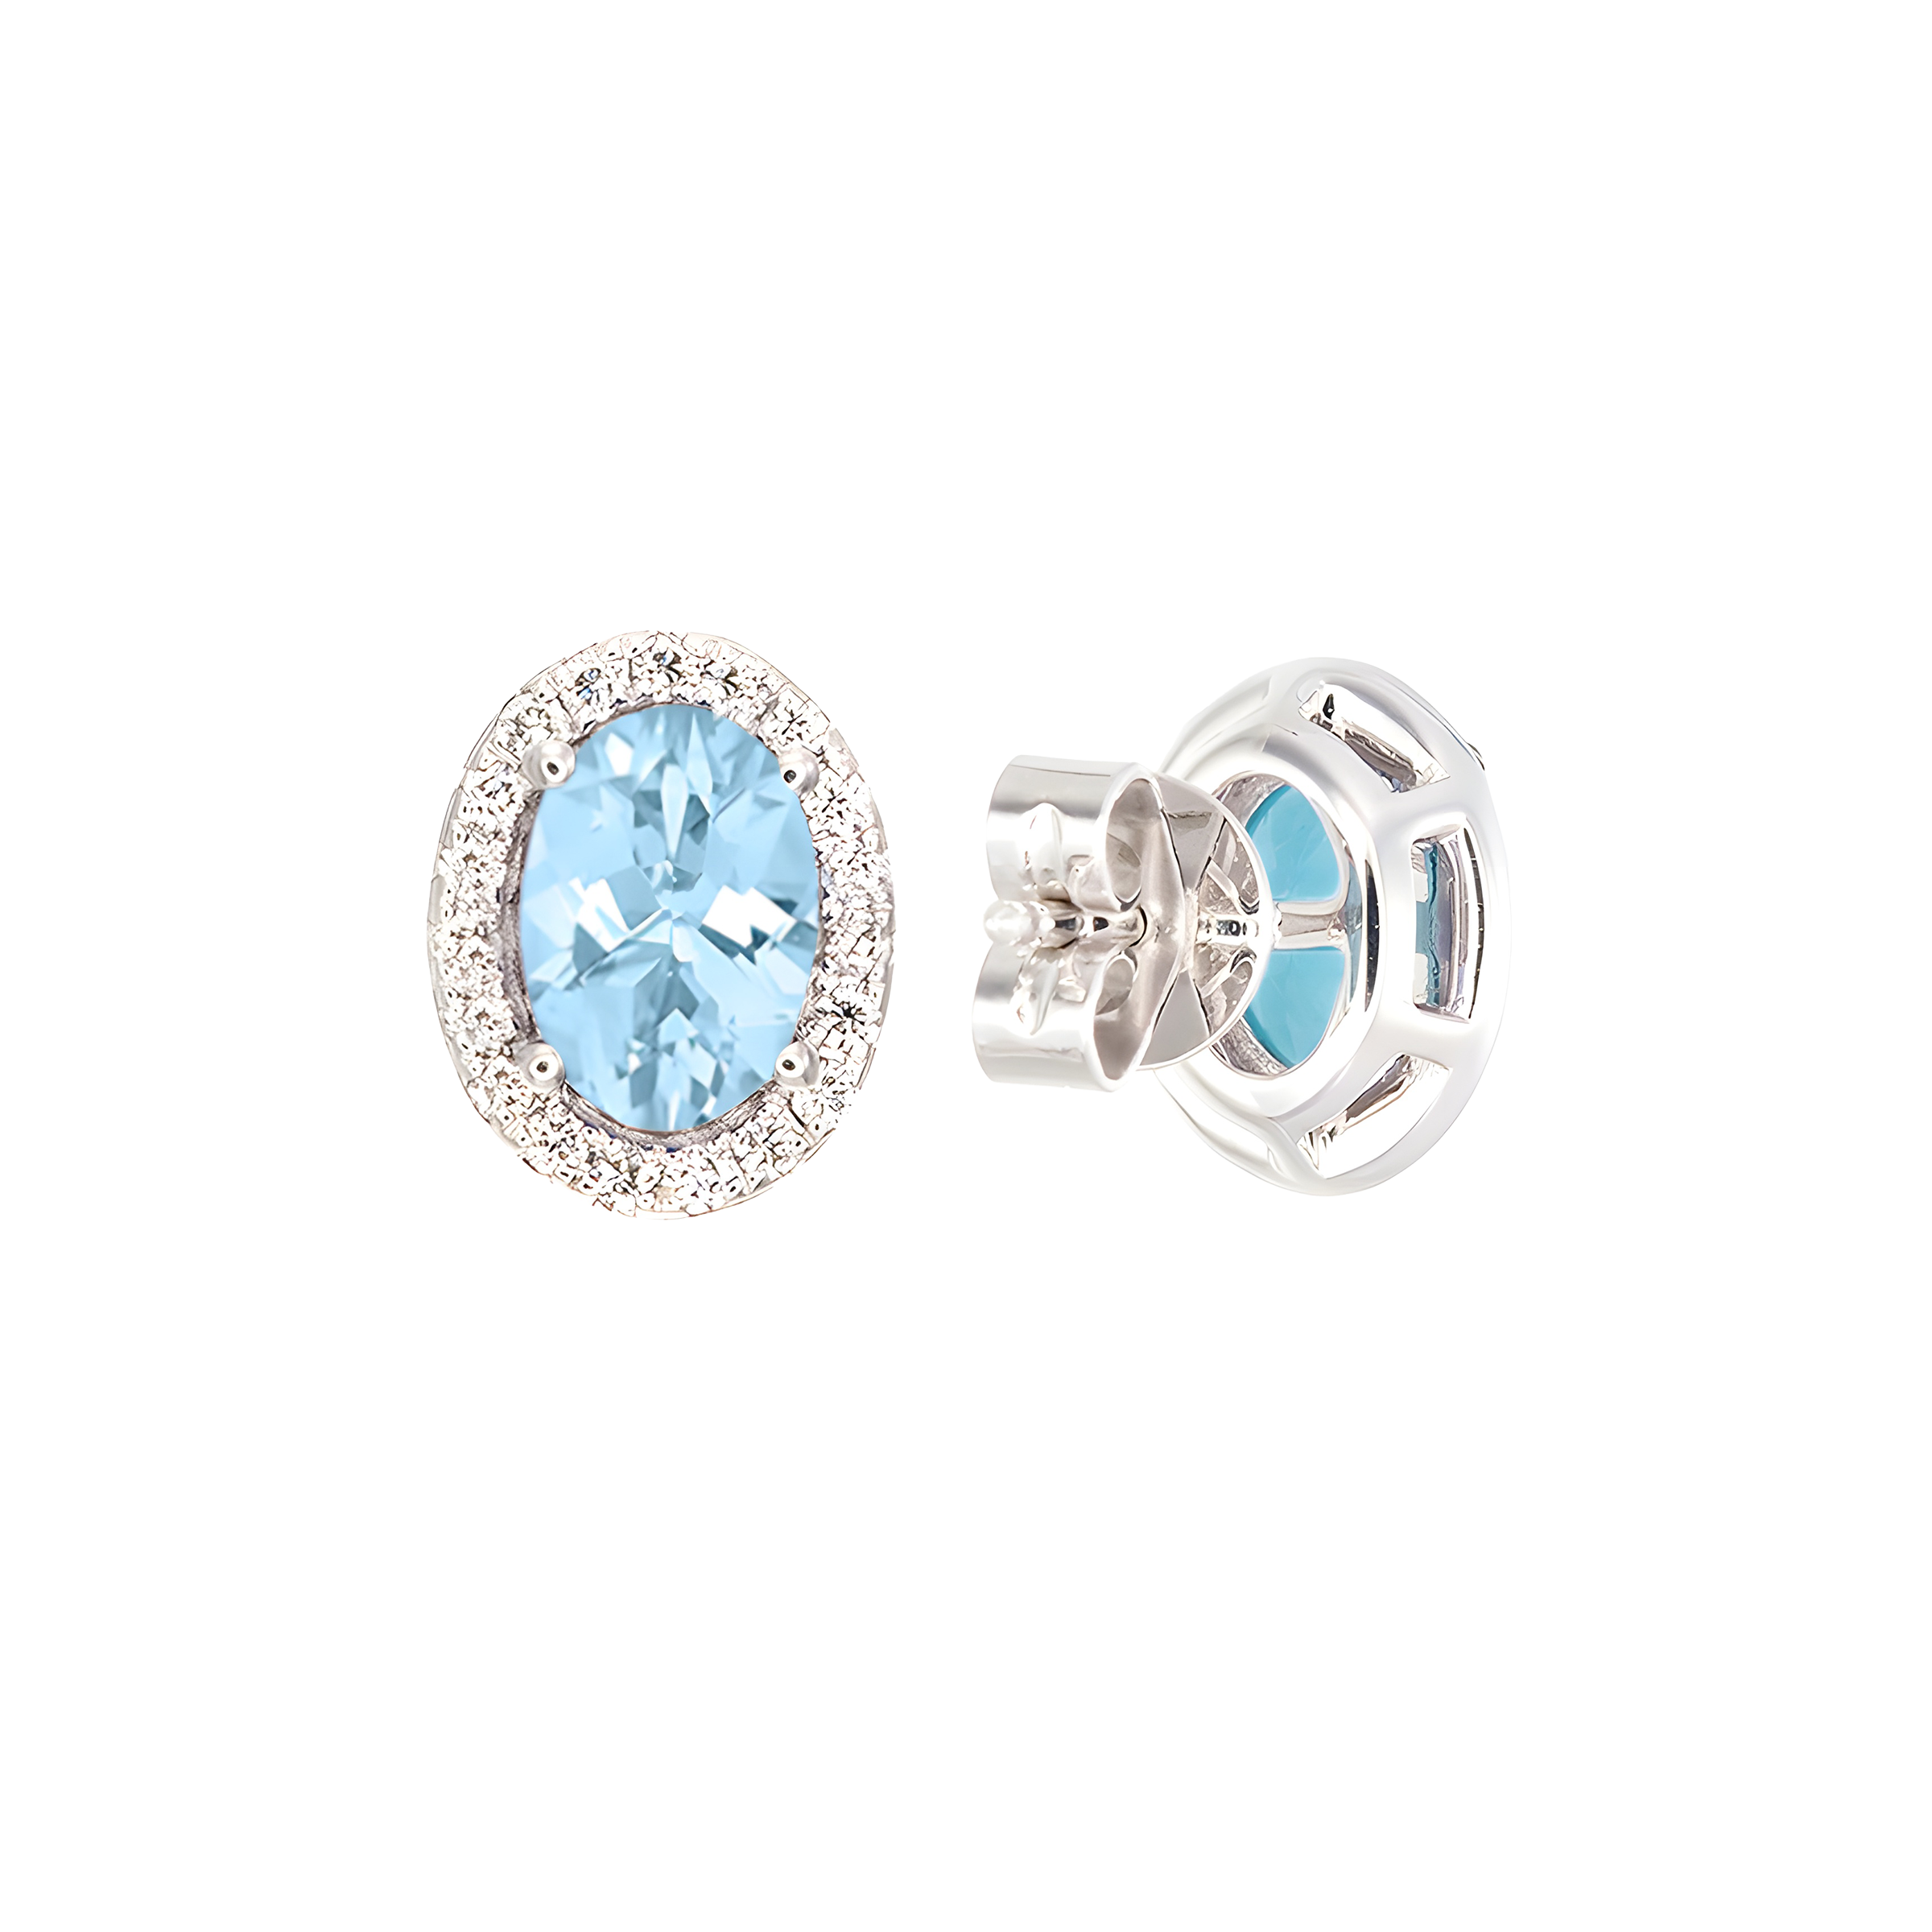 Oval Aquamarine And Diamond Halo Stud Earrings in 18k White Gold